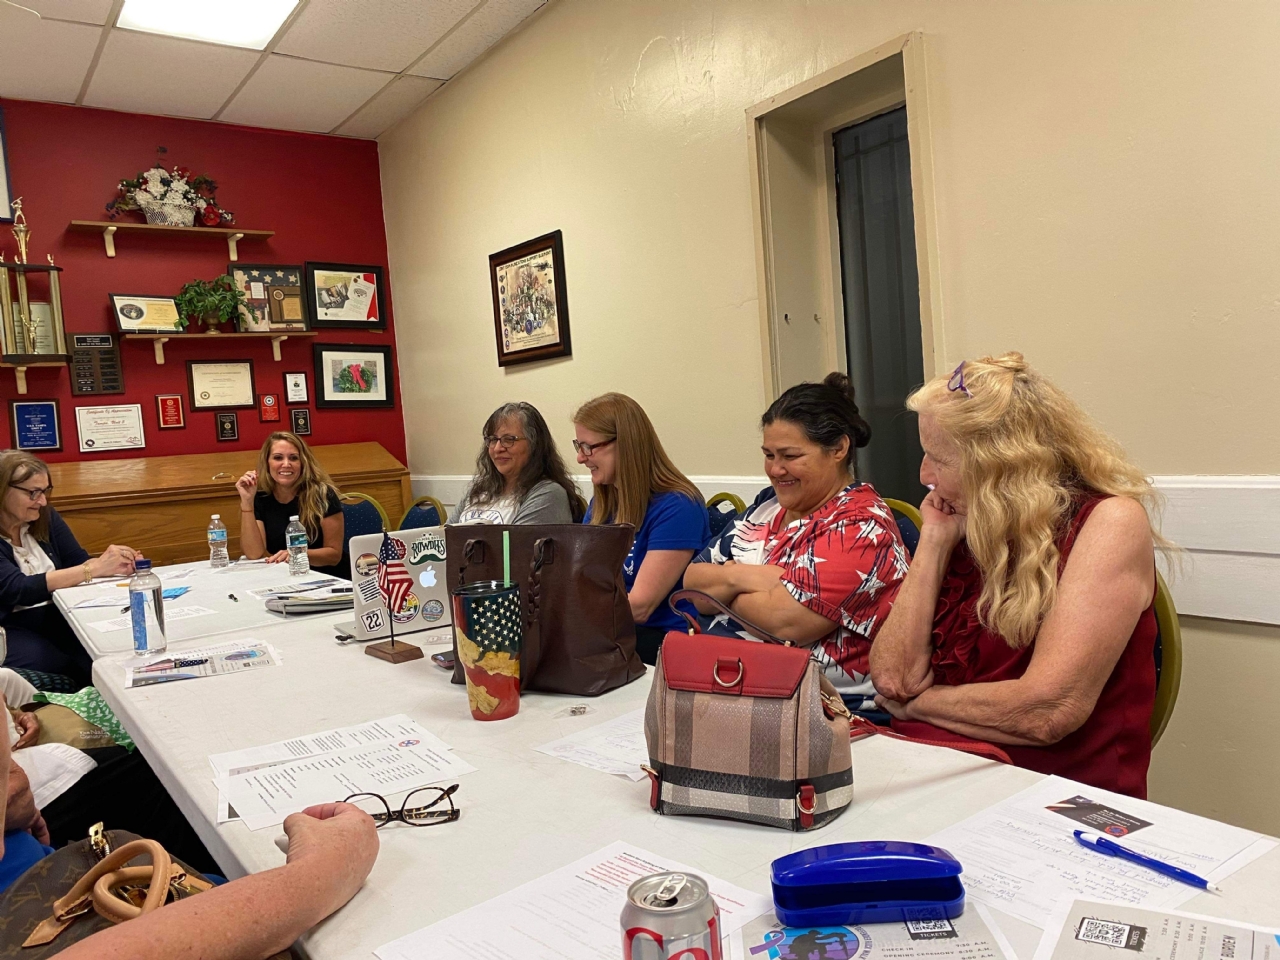 We attended the Blue Star Mothers Meeting on March 1st 2023. We are excited for all of the upcoming projects that we can team up and work together on.